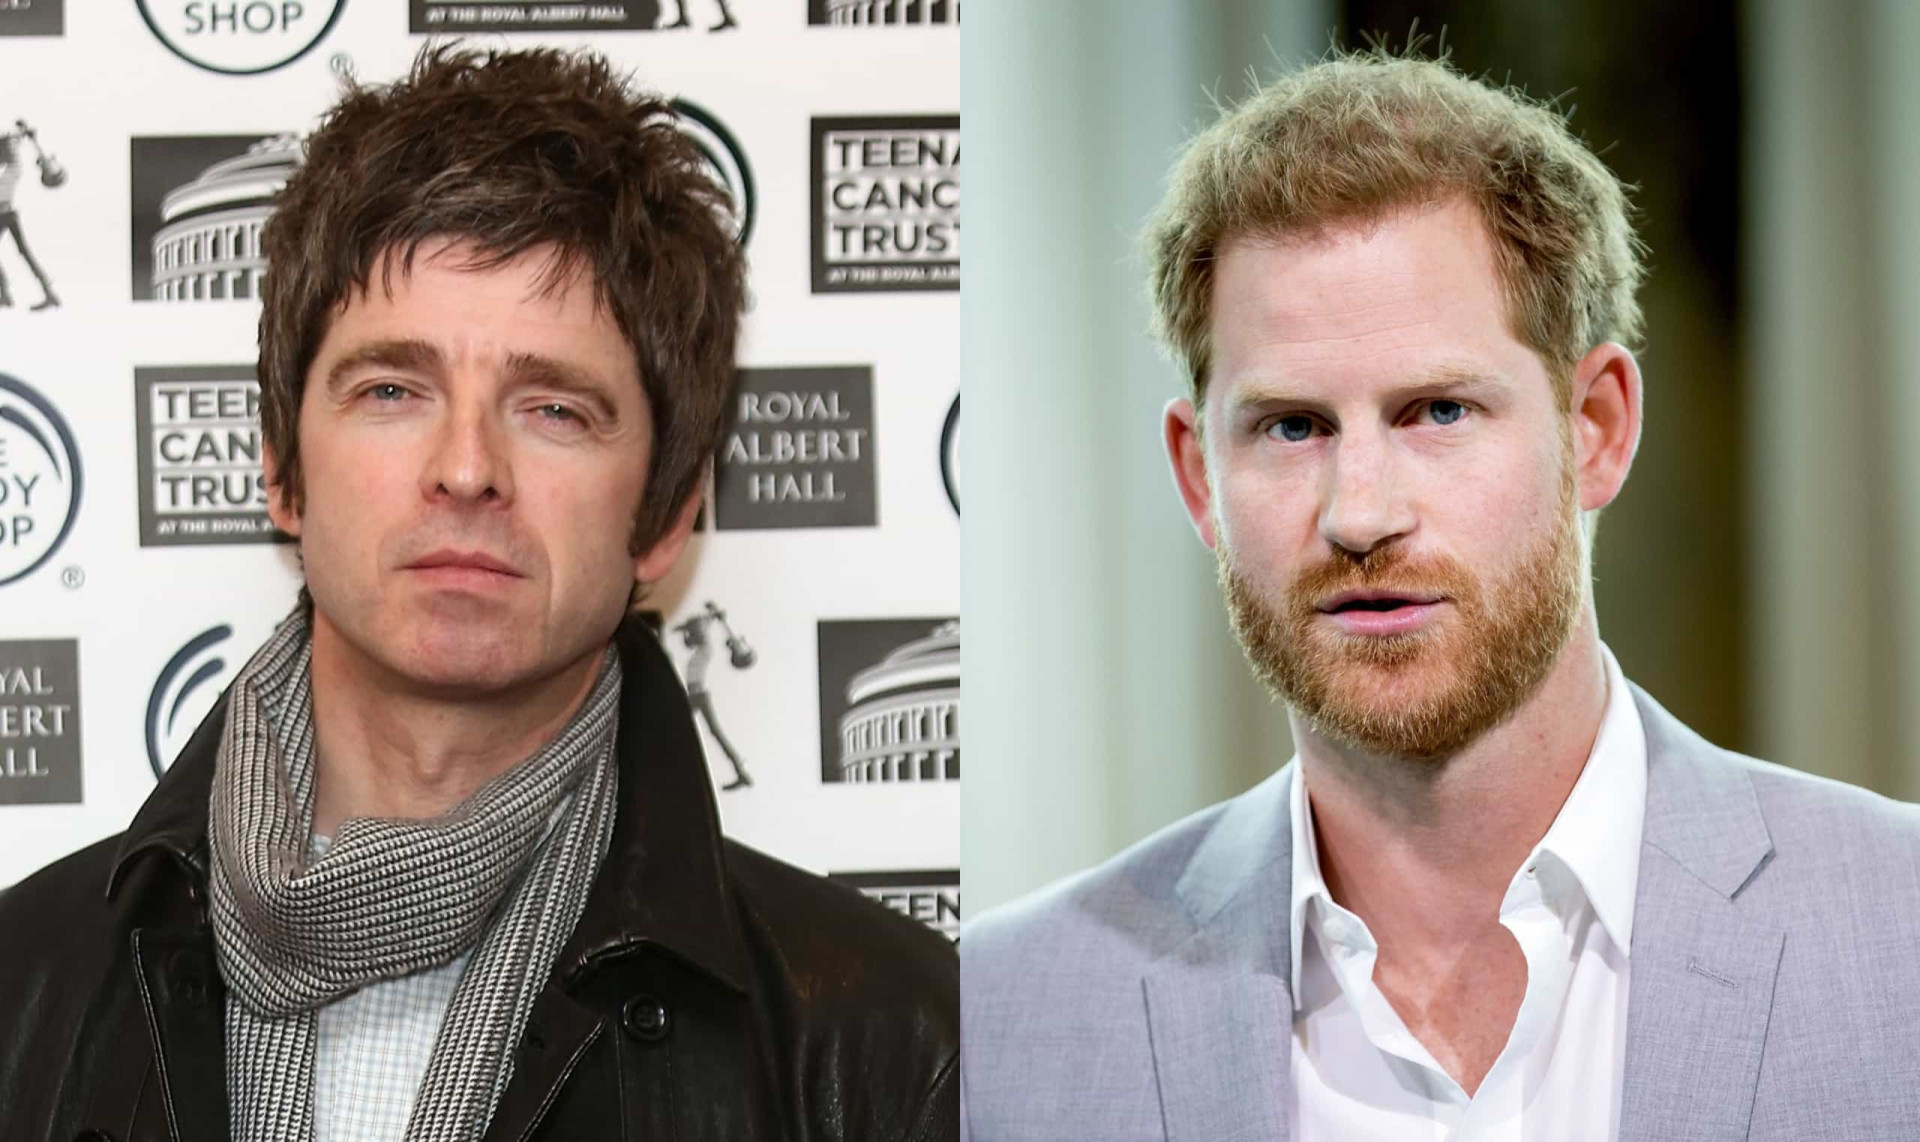 <p>Oasis frontman Noel Gallagher, known for his cantankerous nature, made harsh remarks about Prince Harry during an interview with The Sun. In a profanity-laced rant, he criticized the Prince, referring to him as a "woke snowflake," and slammed him for "dissing" his family in public. (Ironic coming from the man who has carried on an extremely public decade-long feud with his own brother.) When commenting on Prince Harry's marriage to Meghan Markle, he said "This is what happens when you get involved with Americans. As simple as that.” While Prince Harry is unlikely to engage in a public battle with Gallagher, it's safe to say there's no love lost between the two. </p><p><a href="https://www.msn.com/en-us/community/channel/vid-7xx8mnucu55yw63we9va2gwr7uihbxwc68fxqp25x6tg4ftibpra?cvid=94631541bc0f4f89bfd59158d696ad7e">Follow us and access great exclusive content every day</a></p>